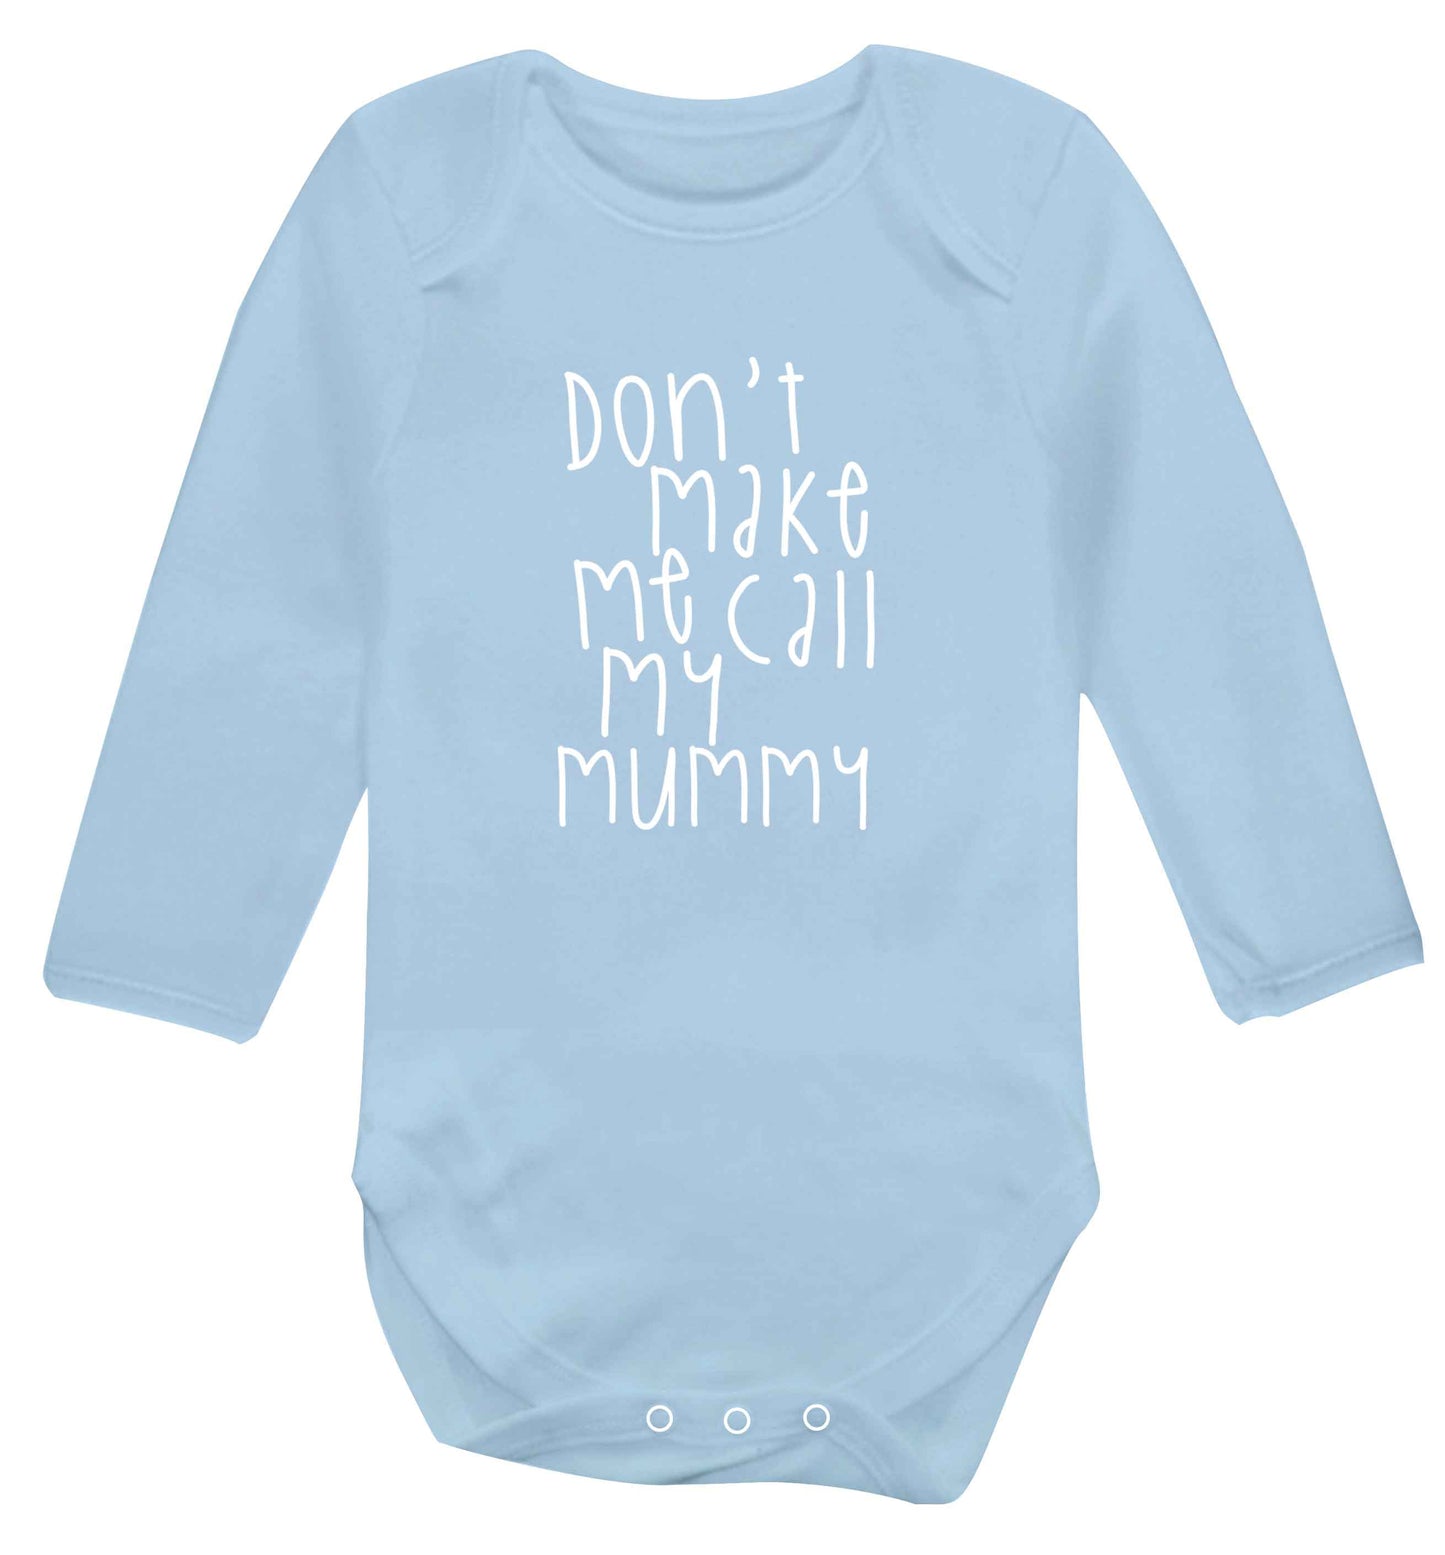 Don't make me call my mummy baby vest long sleeved pale blue 6-12 months